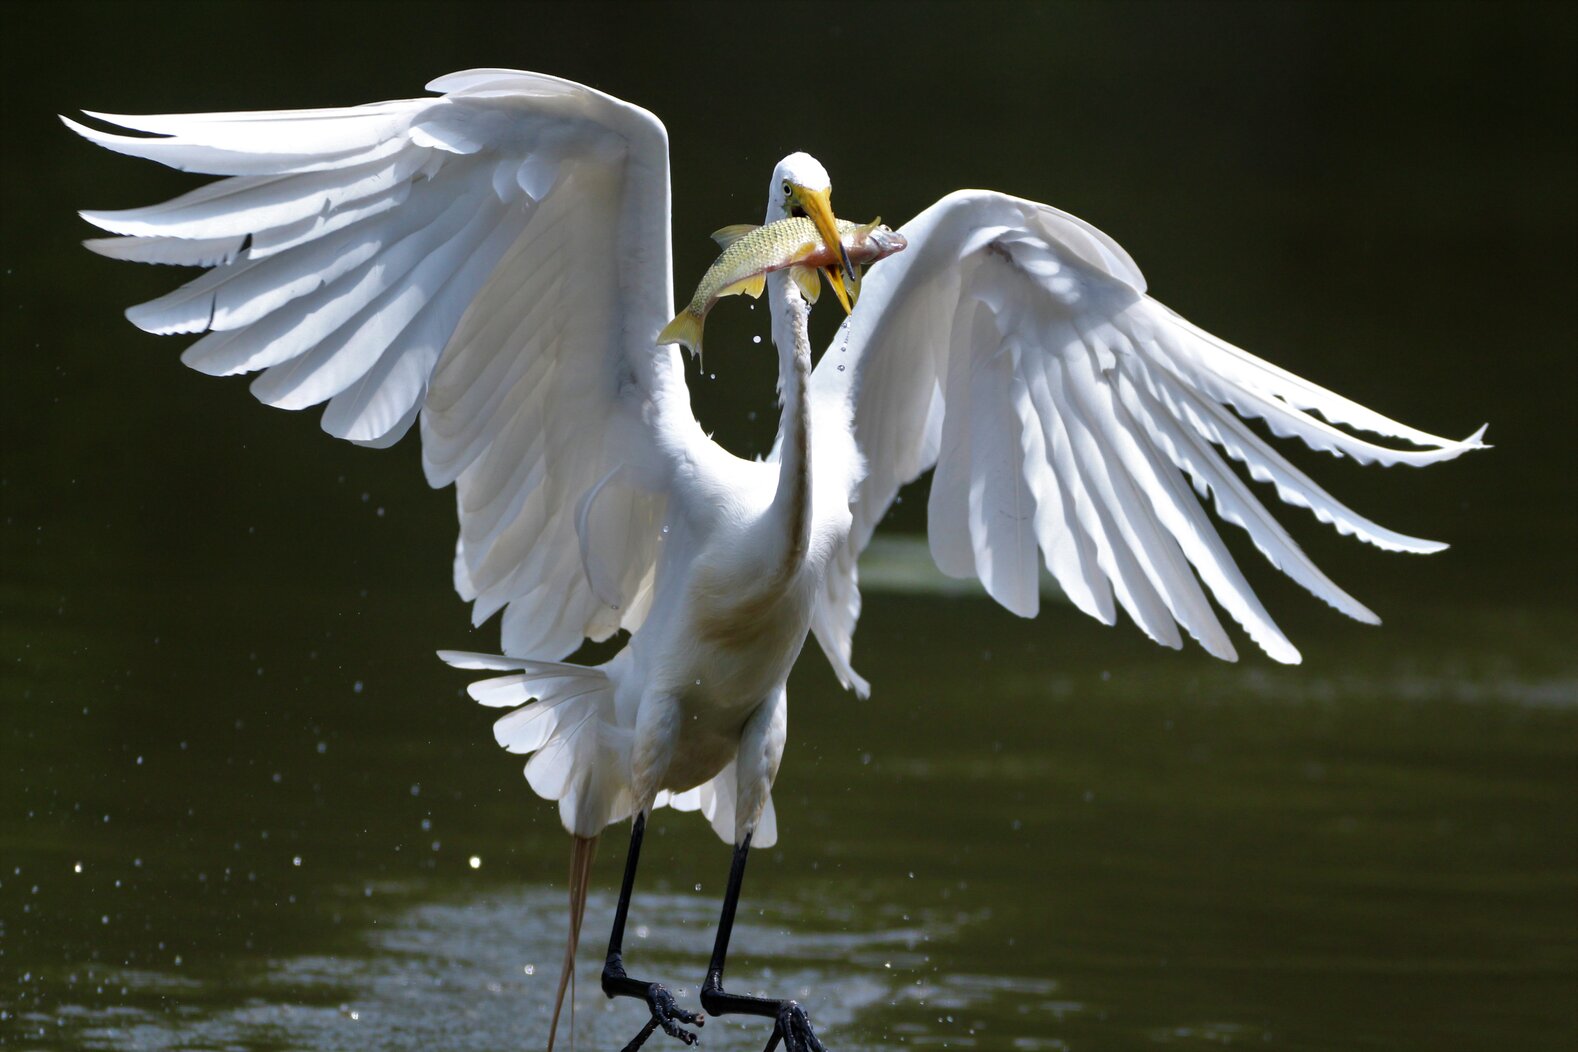 A Great Egret snares a good catch. Photo: Dave Ostapiuk